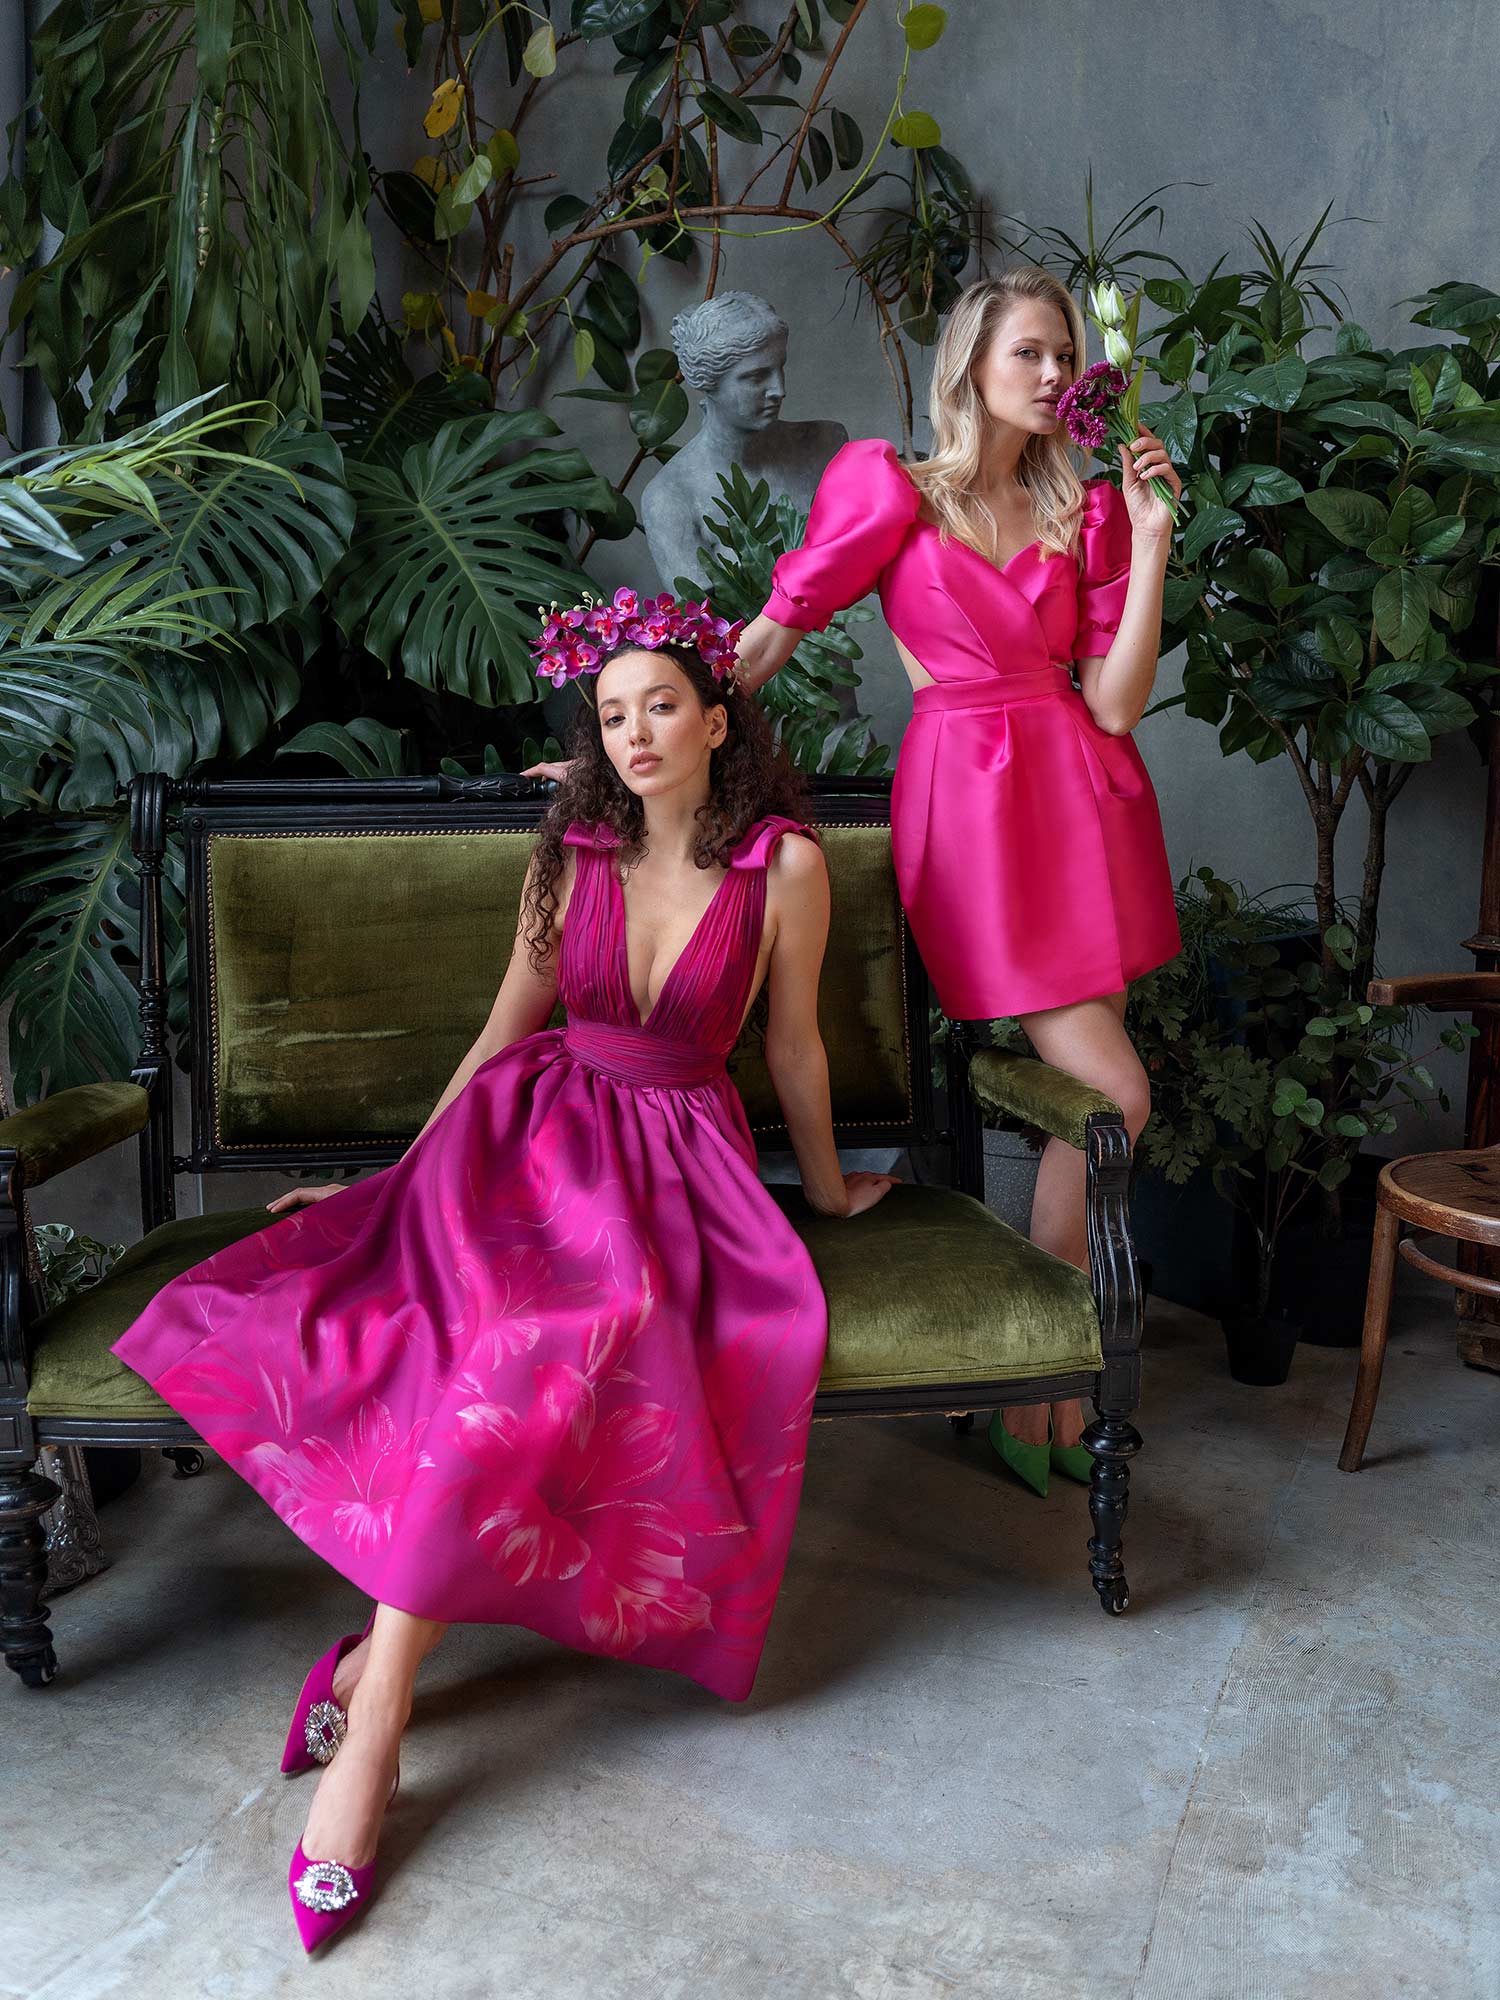 Style #706a, A-line floral print cocktail dress with V-neck draped bodice and bow accents; Style #712a, tea-length cocktail dress with puff sleeves and open back